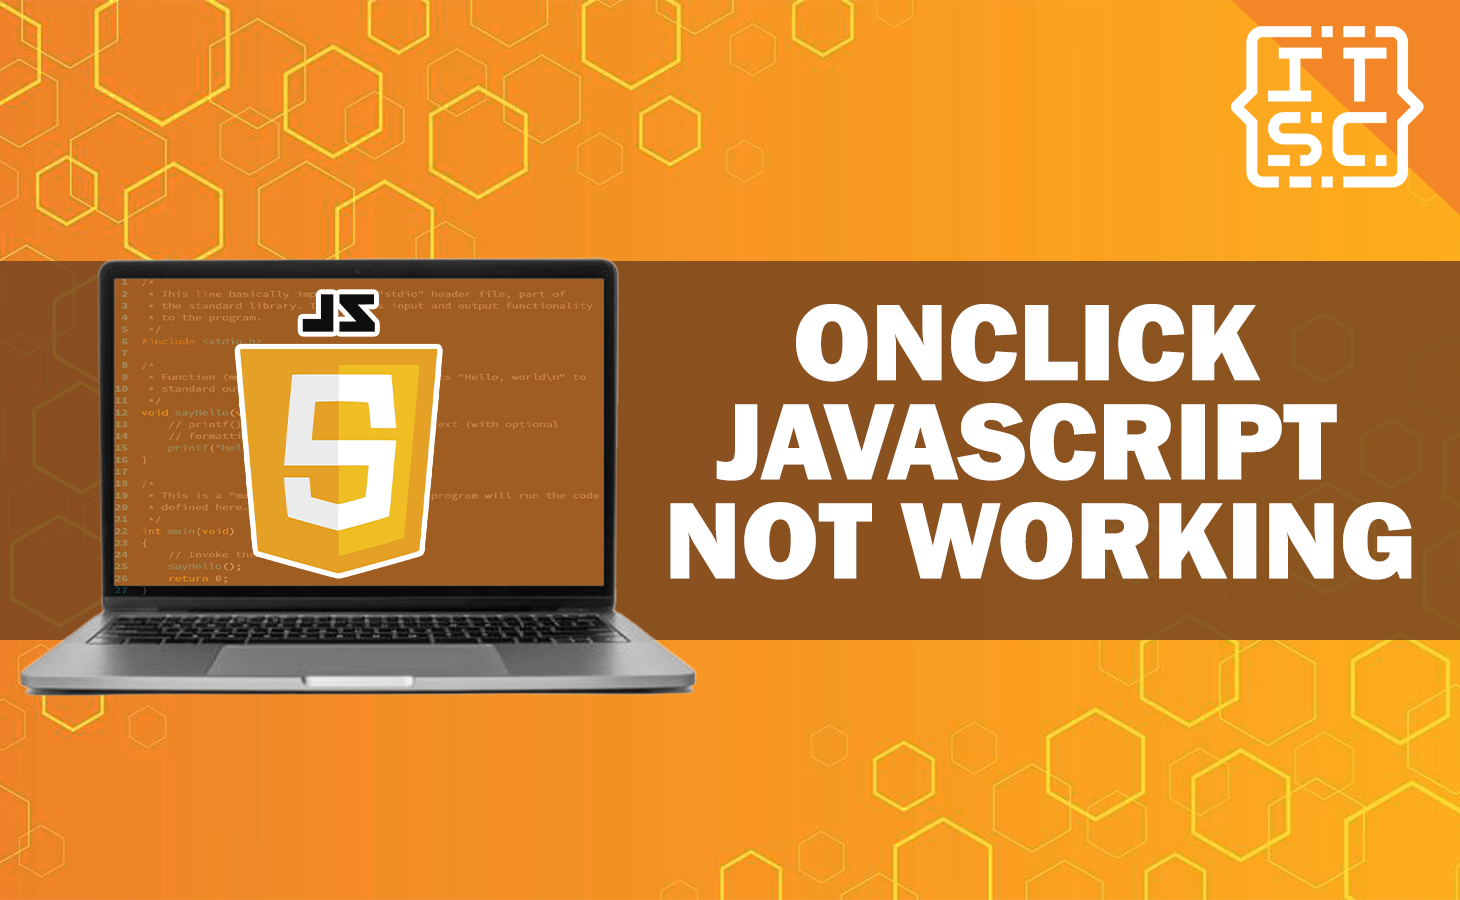 Onclick JavaScript Not Working